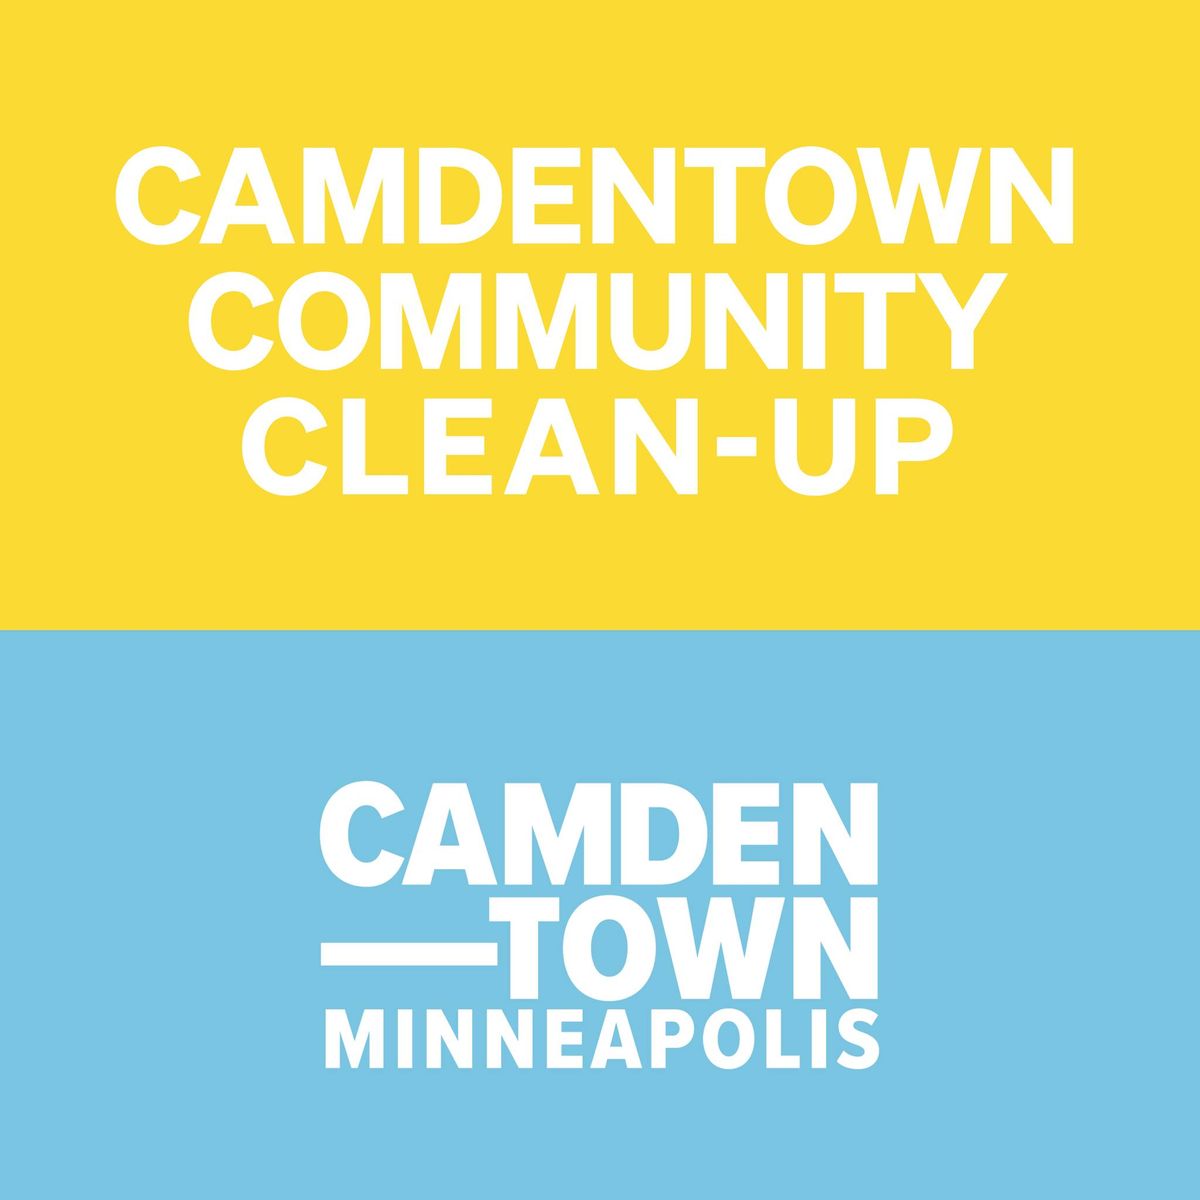 Camdentown Community Clean-up